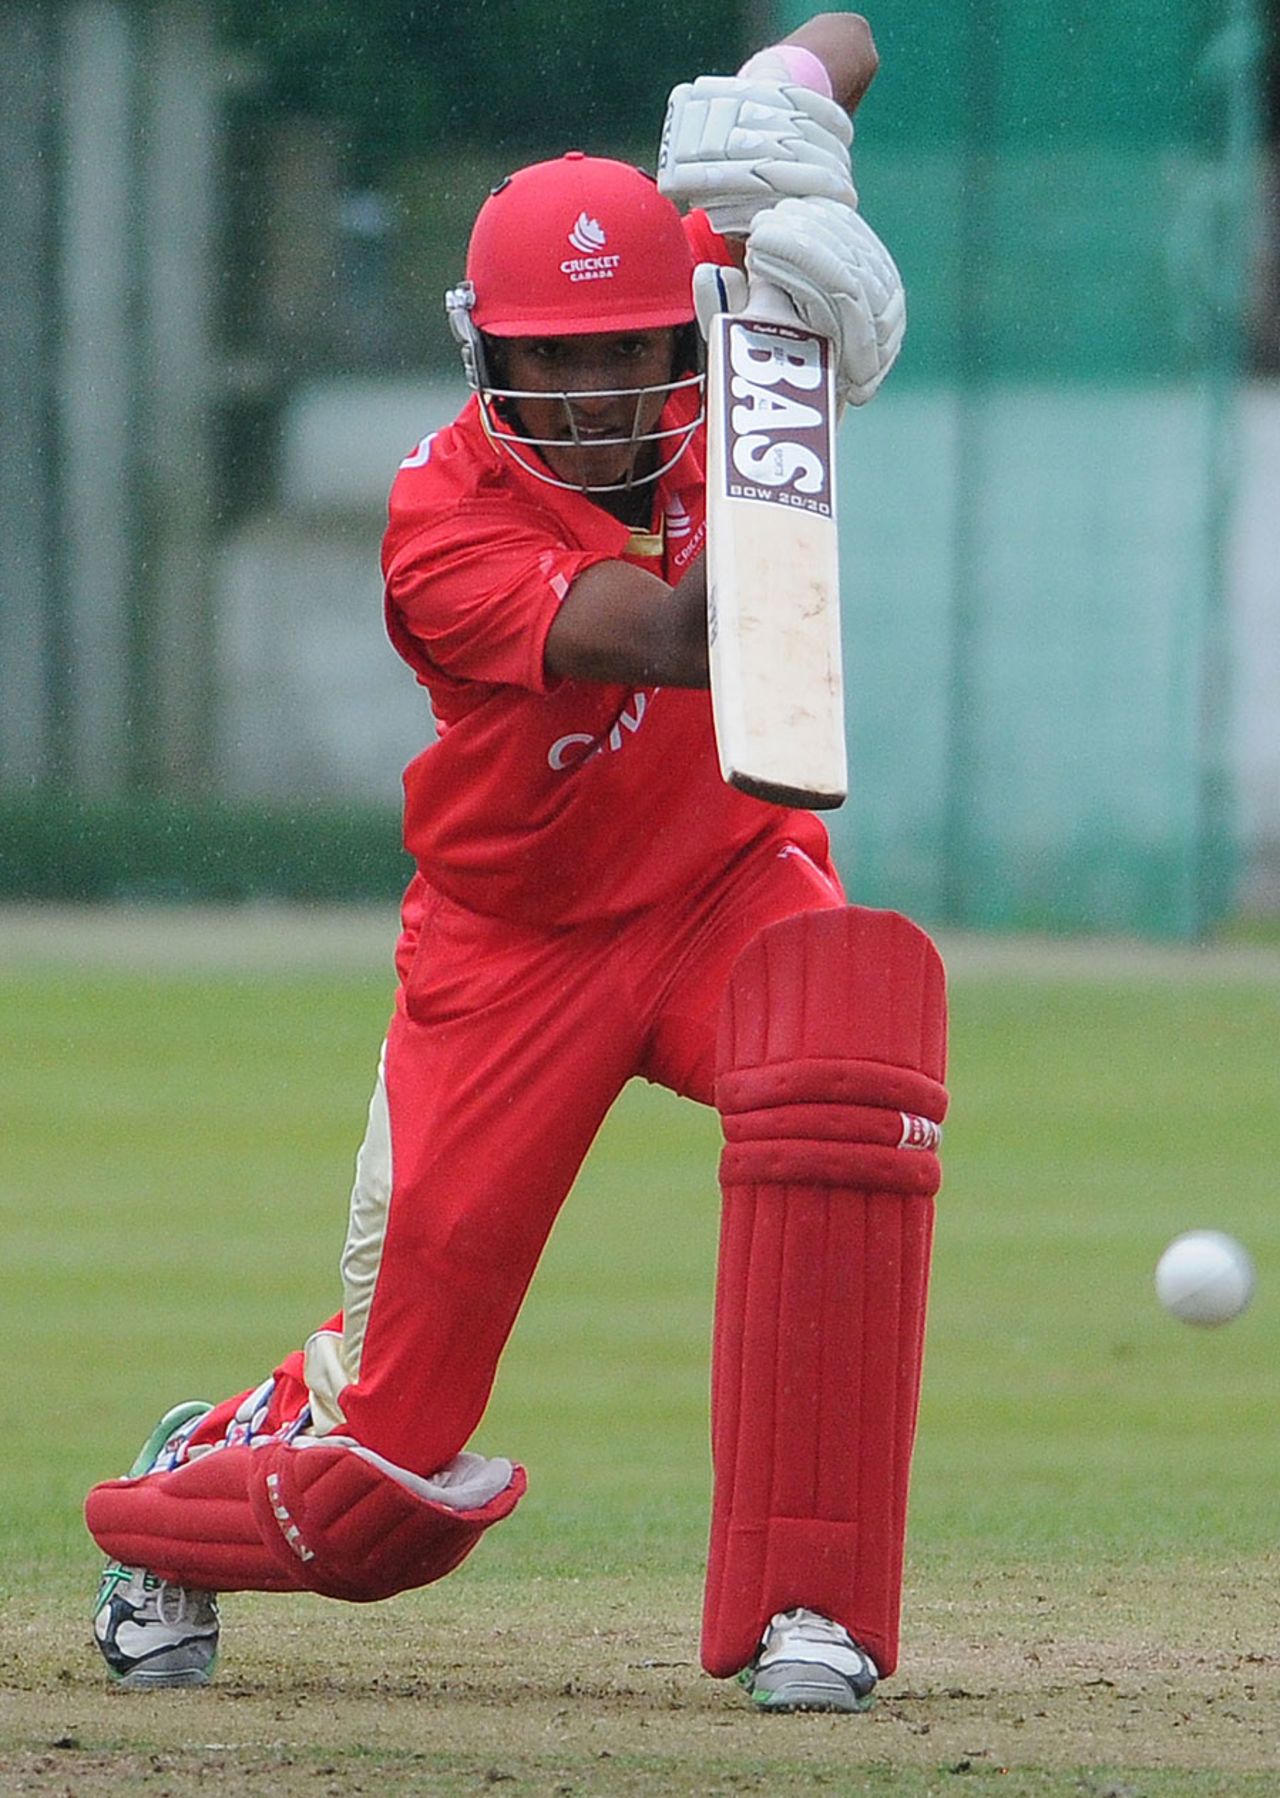 Nitish Kumar scored 150 but could not prevent a PNG victory, Canada U-19s v Papua New Guinea U-19s, Eglinton, August 6, 2011